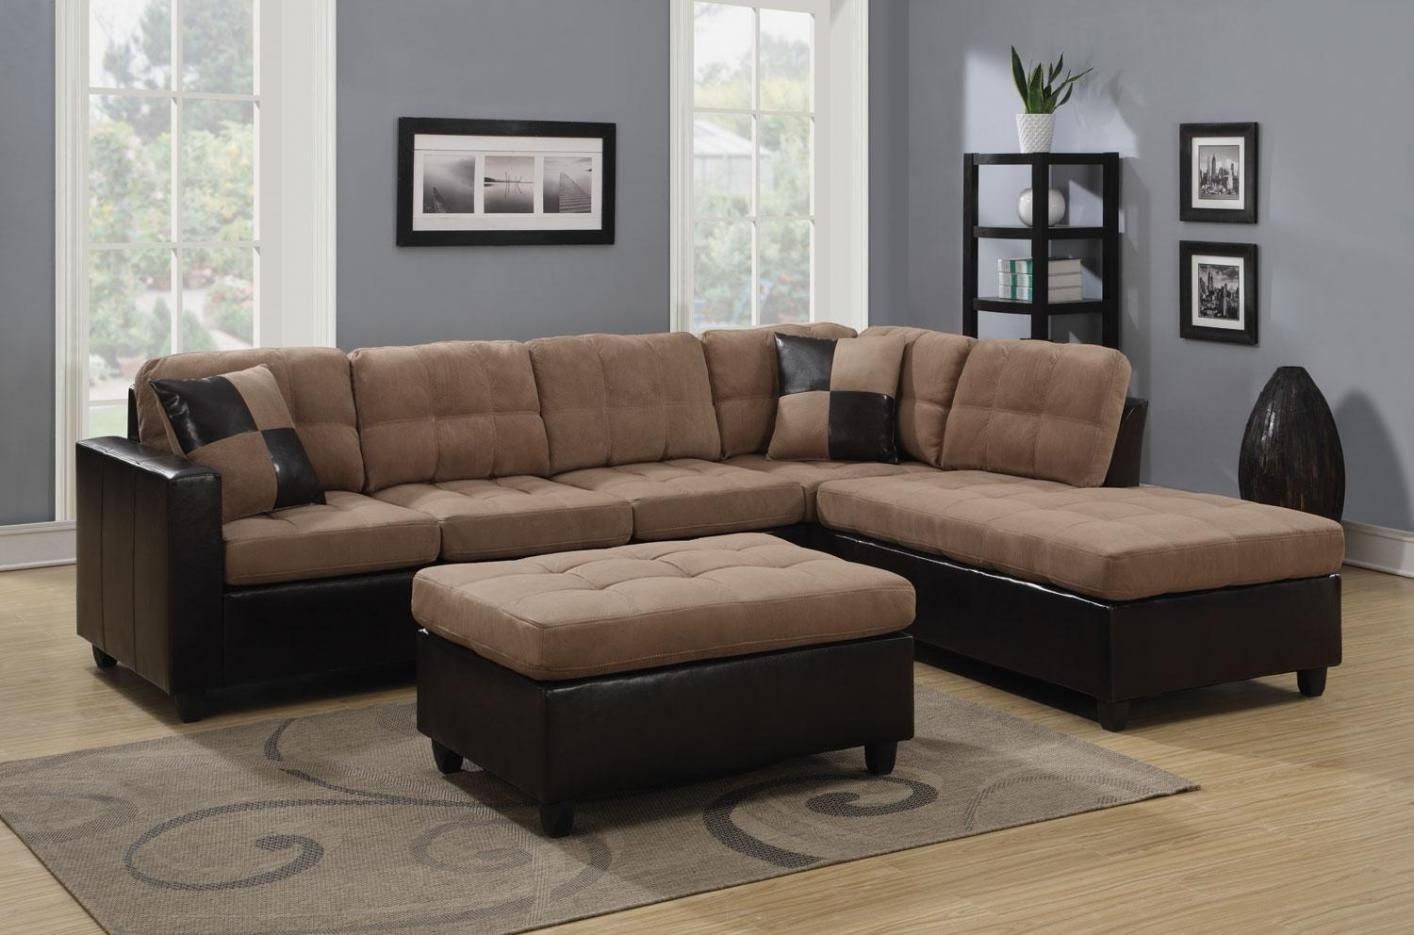 Furniture: Mallory Beige Leather Sectional Sofa Steal A Sofa Furniture With Beige Sectional Sofas (View 9 of 15)